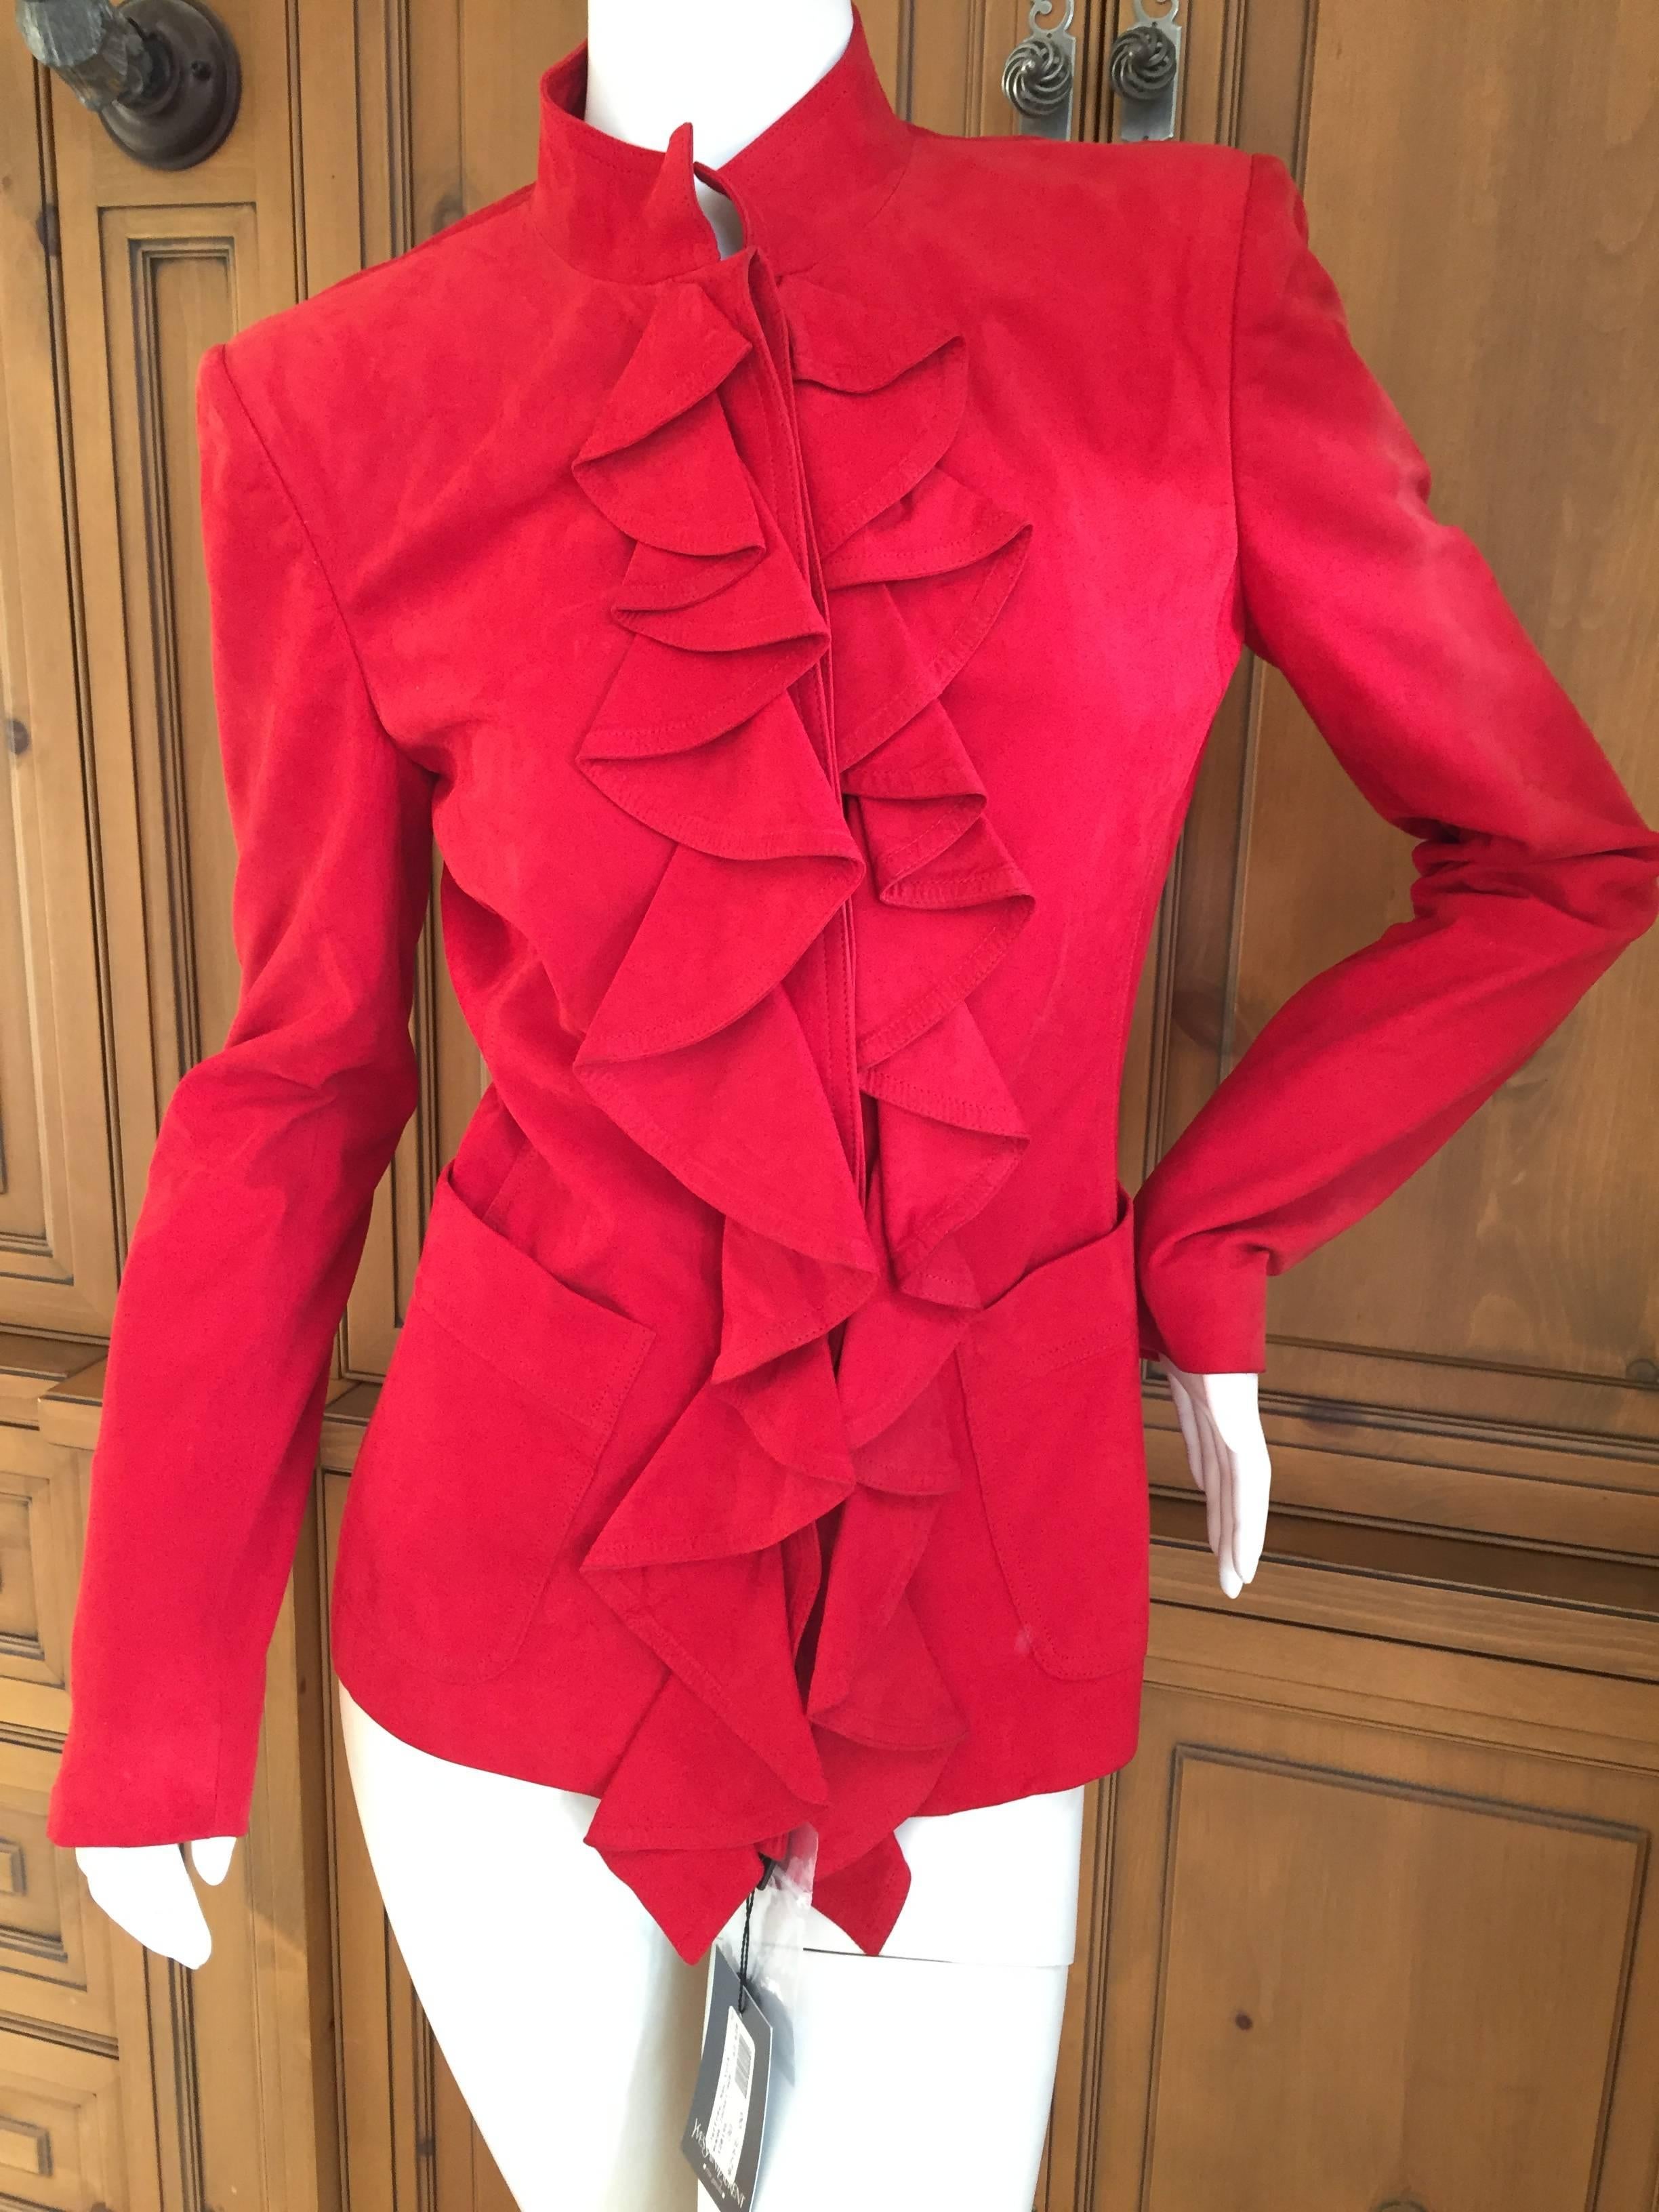 YSL by Tom Ford Red Suede Ruffle Front Jacket NWT F 2003 1